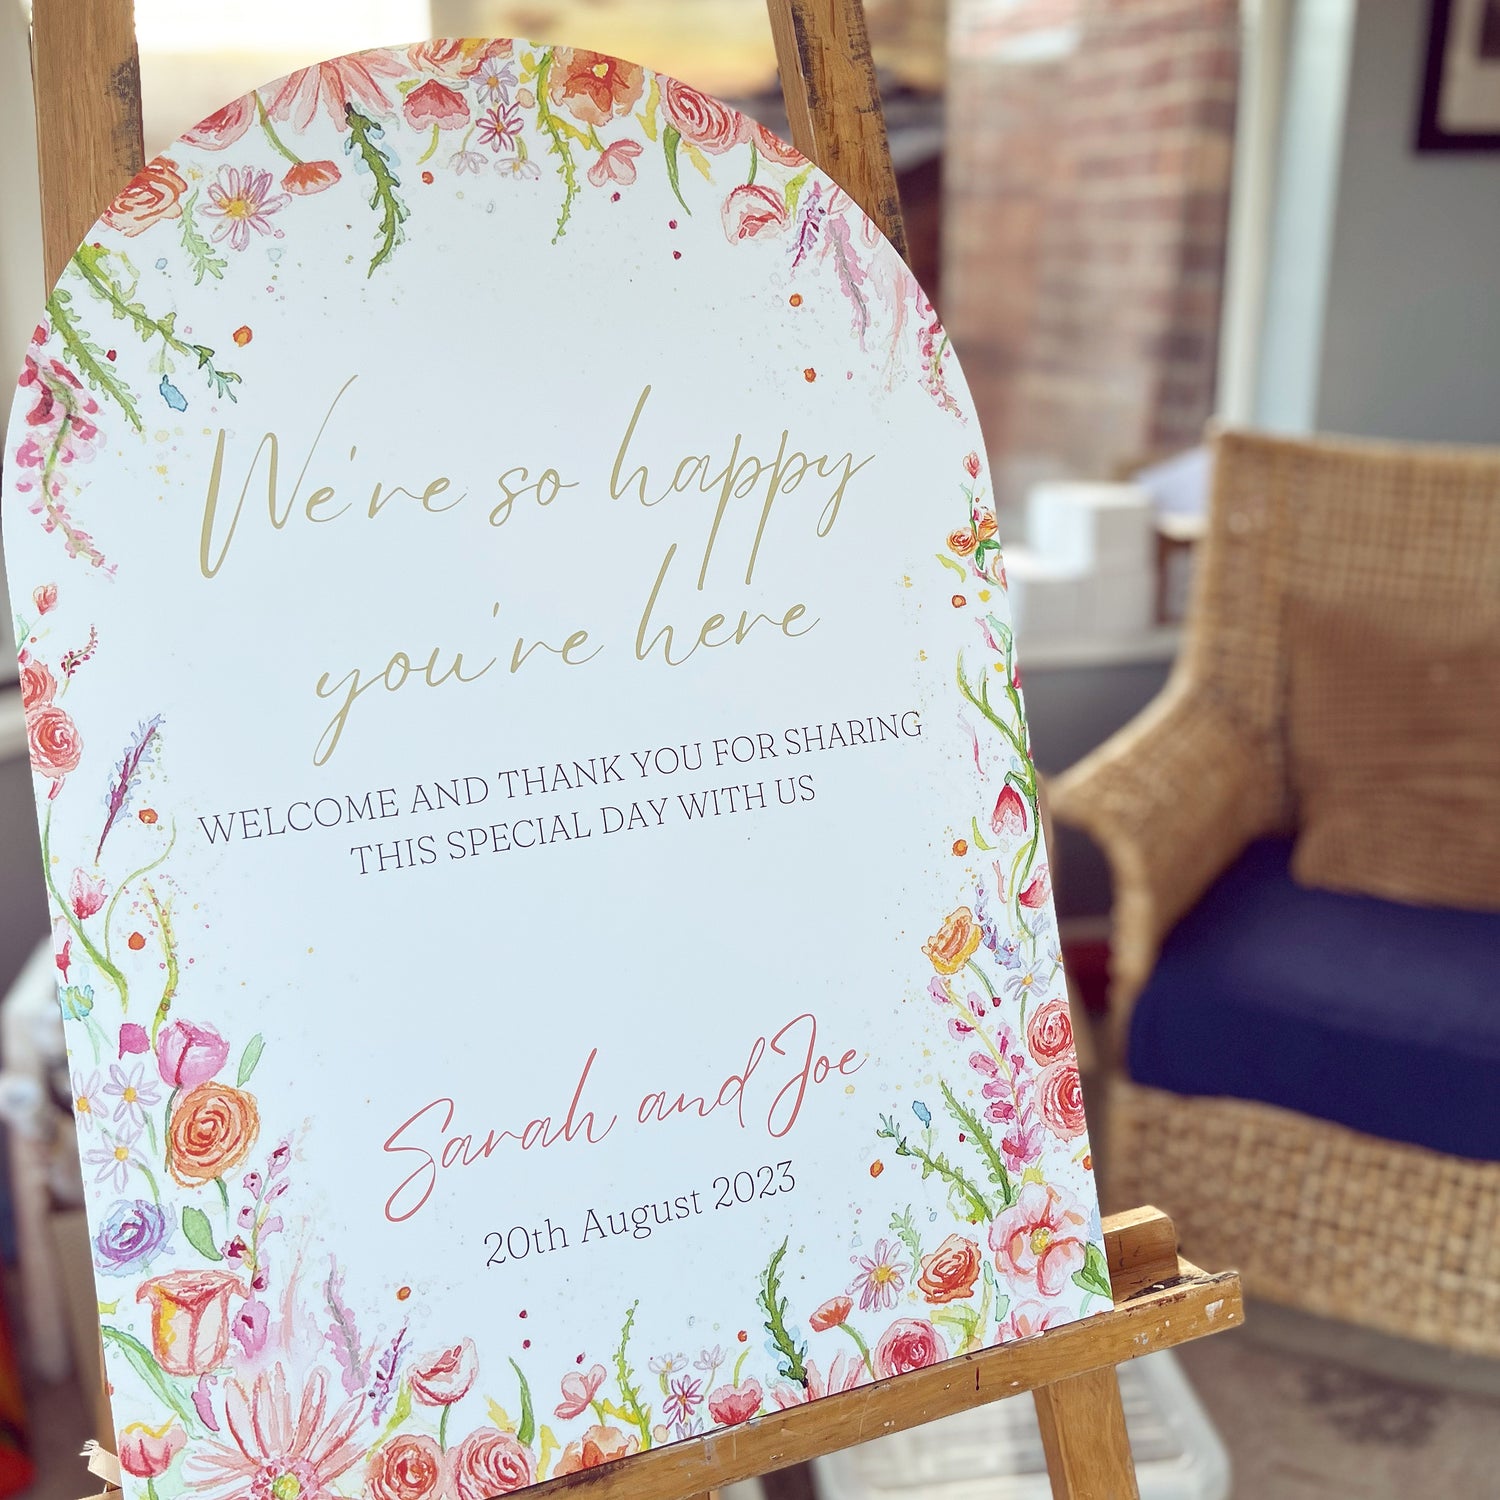 A luxury welcome board for a summer wedding, designed in watercolour paints by local artist and stationer, Eve Leoni Smith.